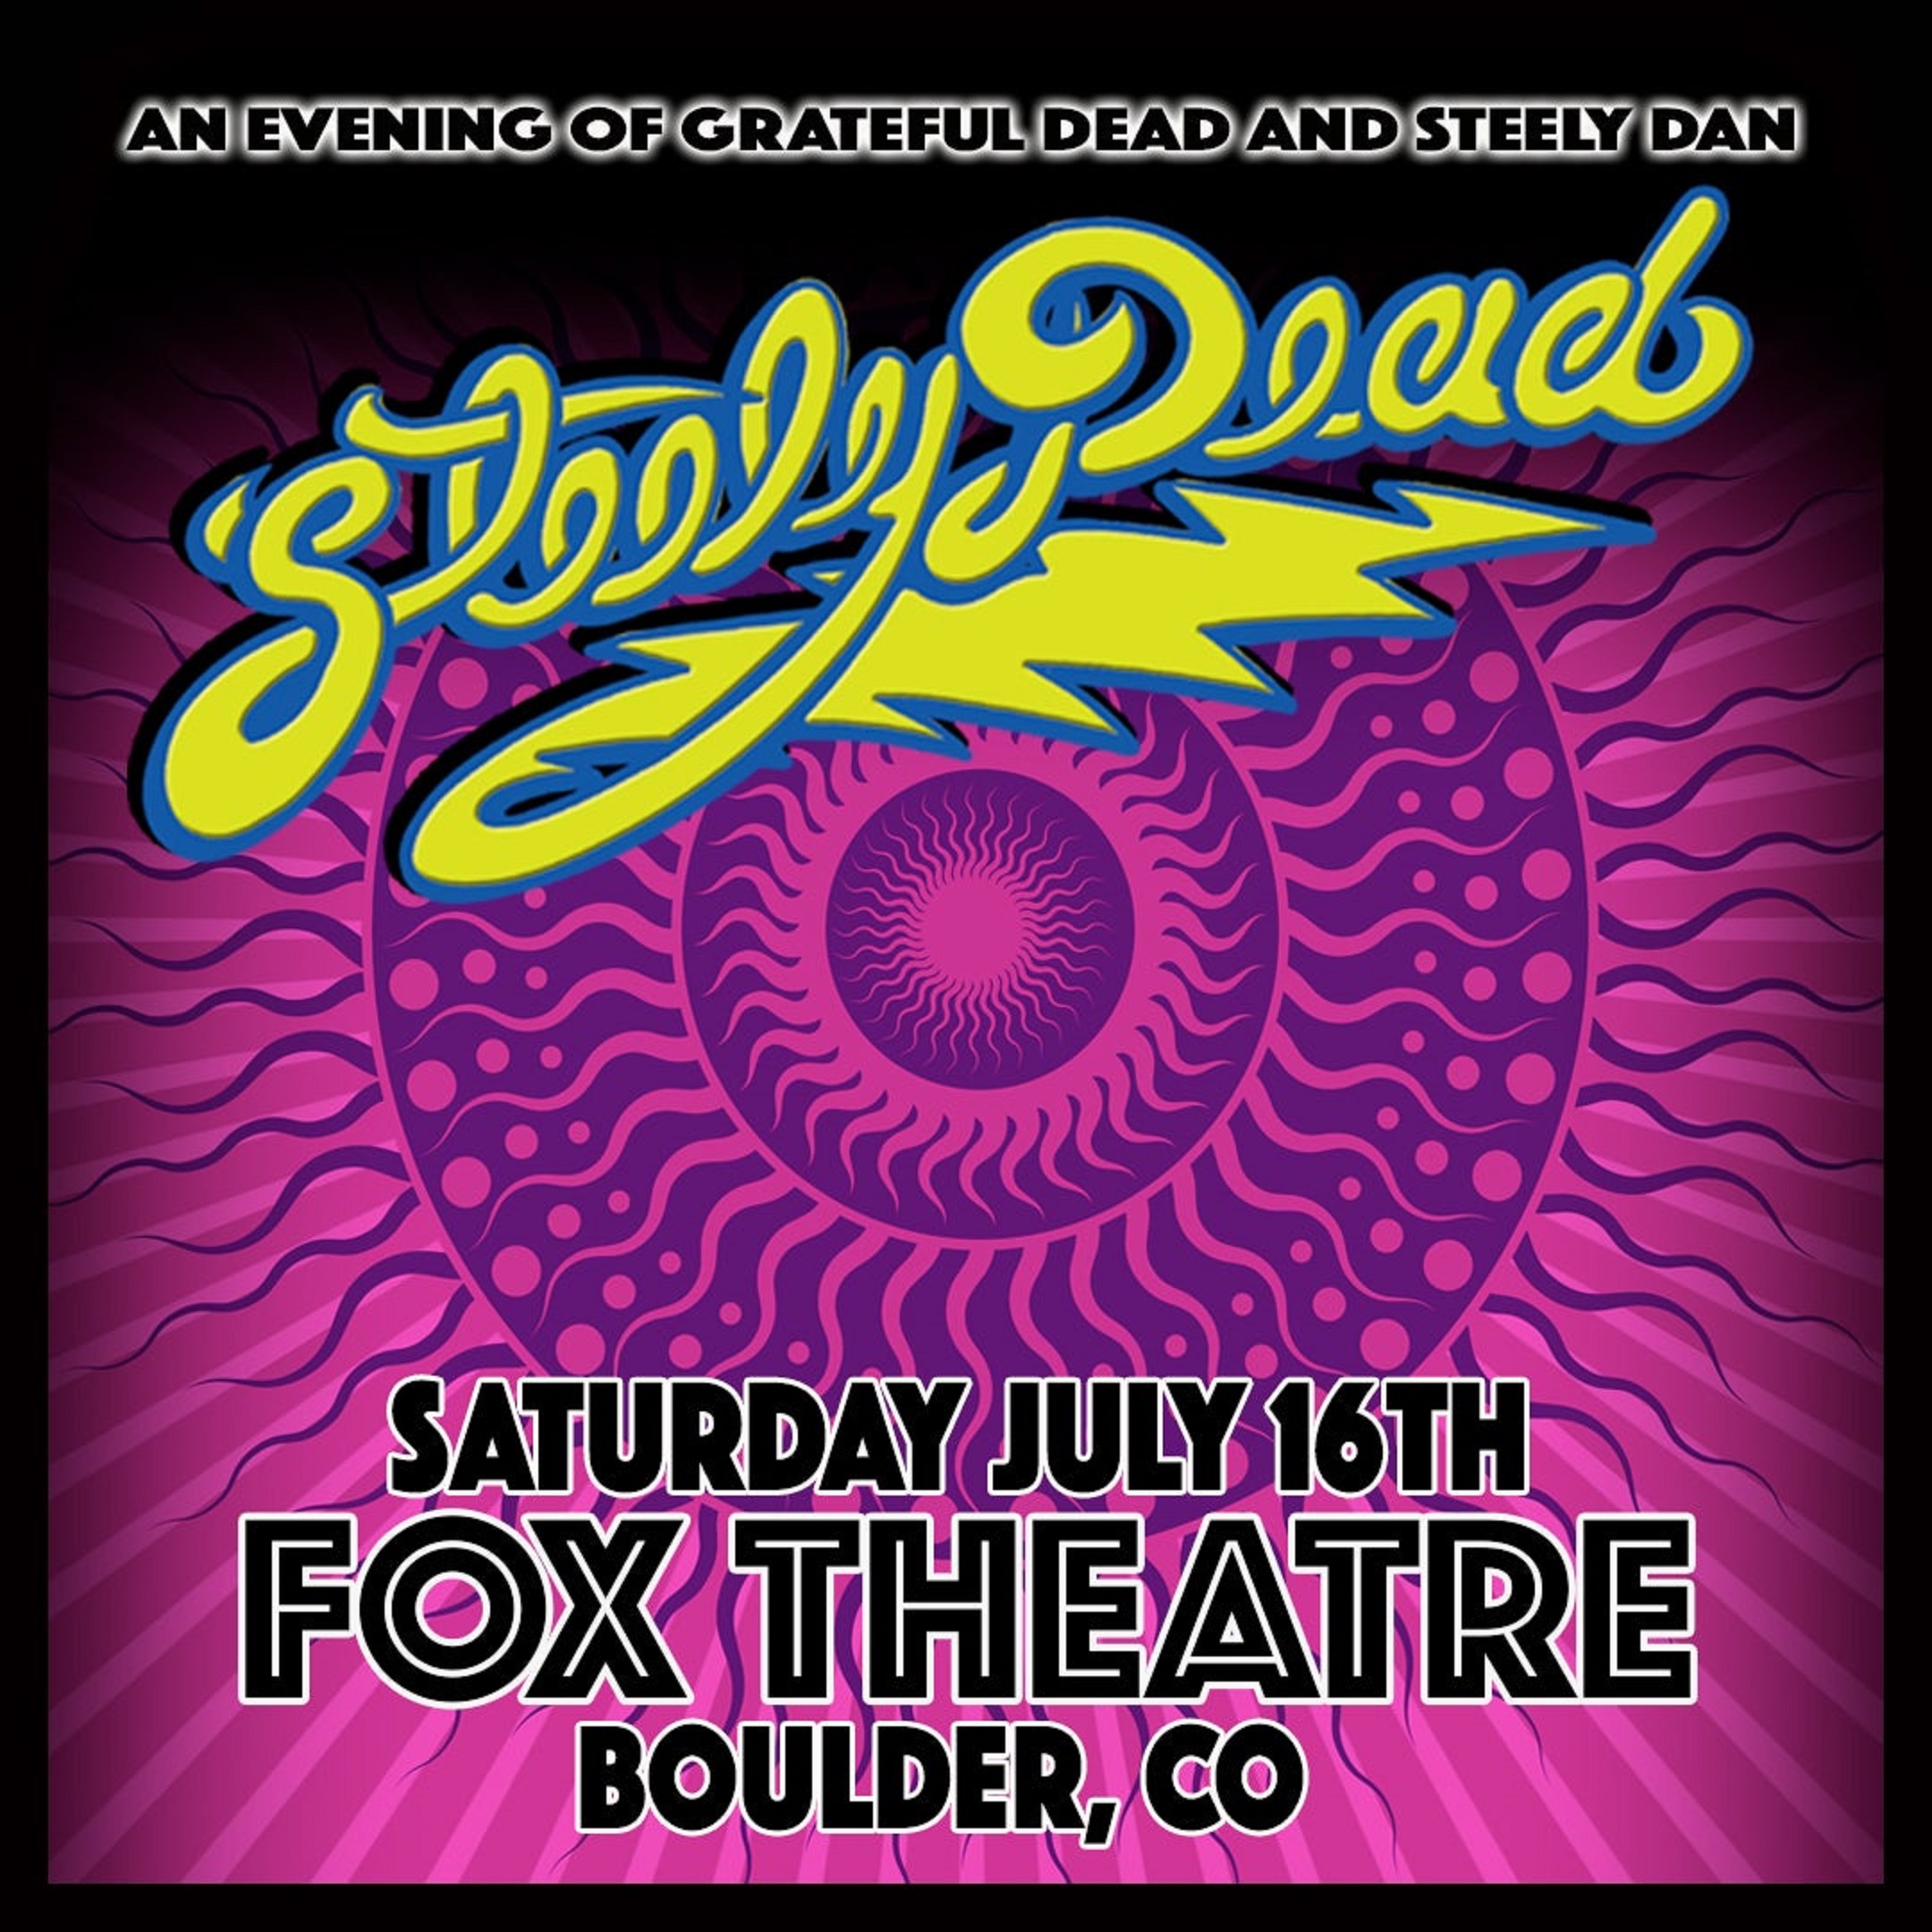 Steely Dead to play The Fox Theatre July 16th, 2022